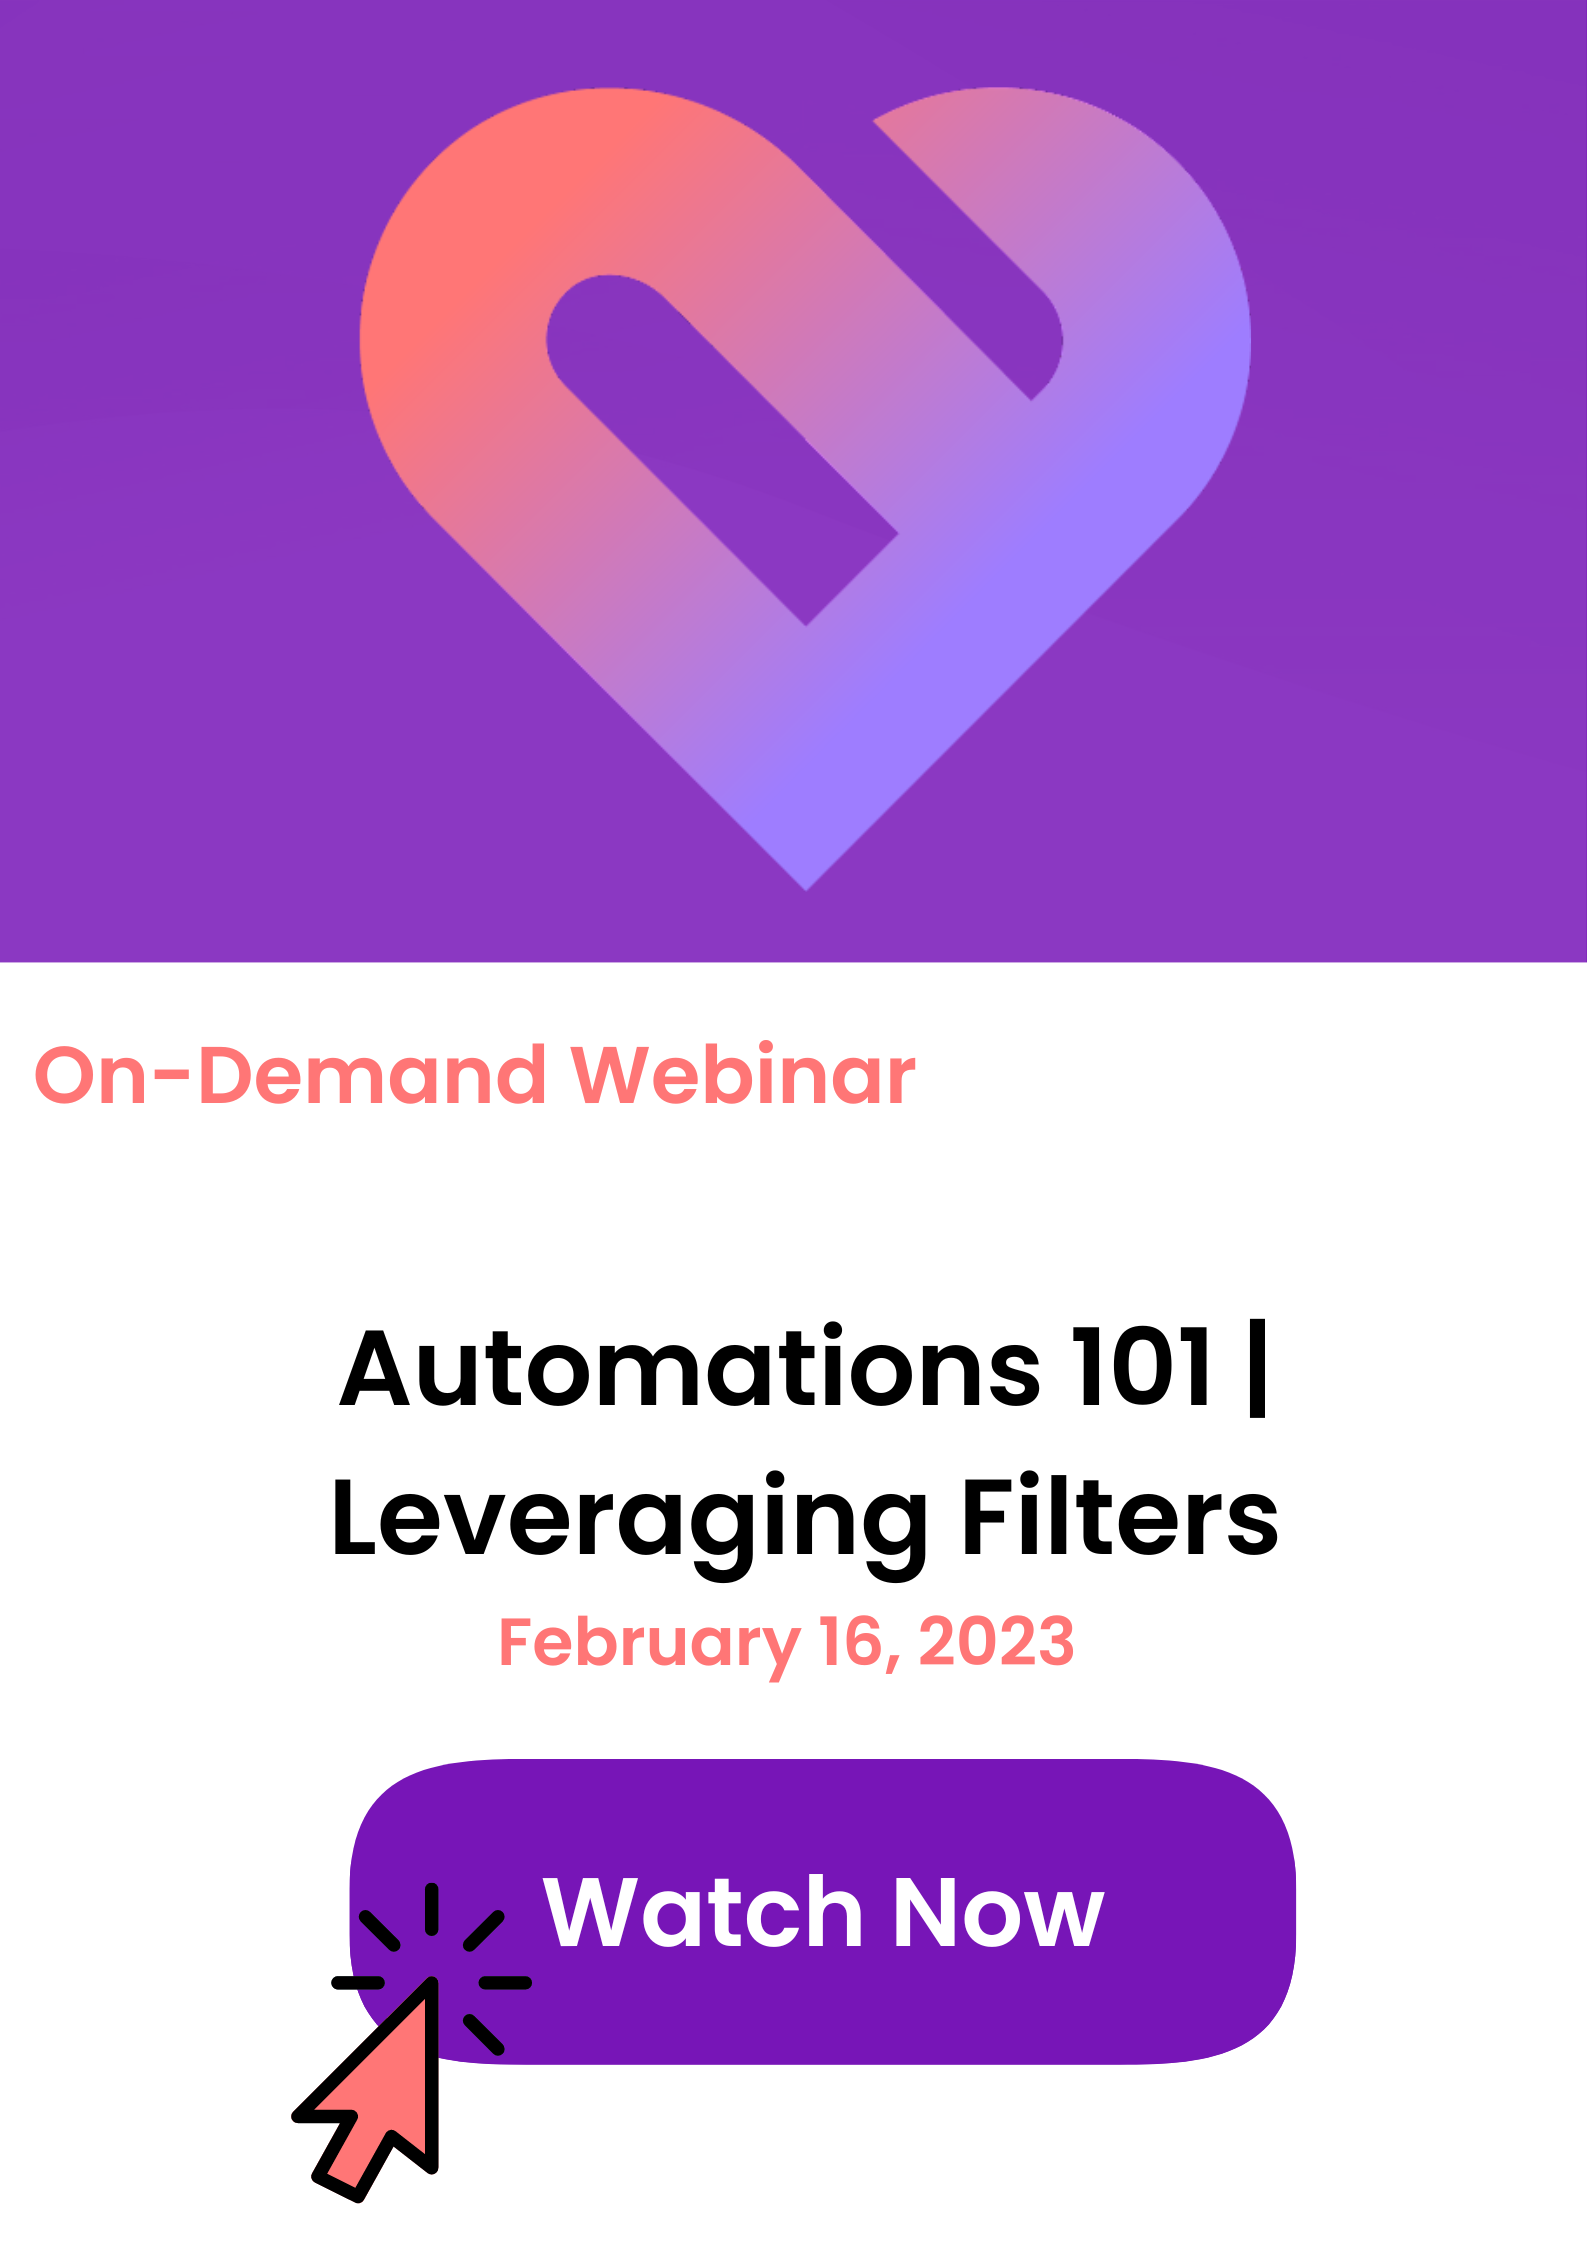 On-demand webinar tile for Automations 101, click to watch now